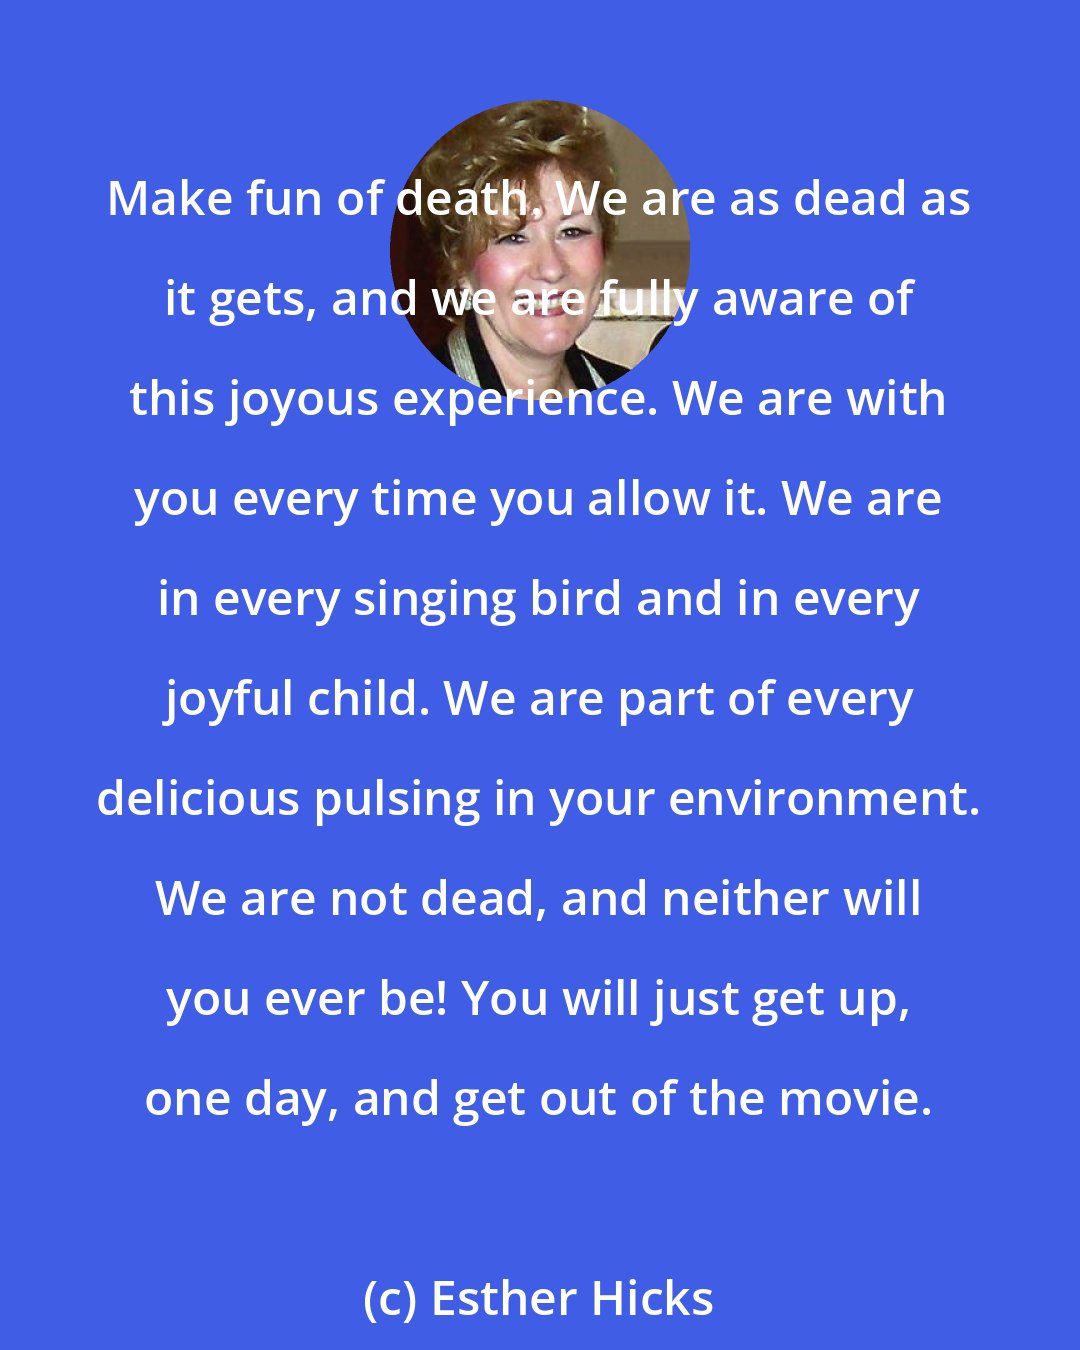 Esther Hicks: Make fun of death. We are as dead as it gets, and we are fully aware of this joyous experience. We are with you every time you allow it. We are in every singing bird and in every joyful child. We are part of every delicious pulsing in your environment. We are not dead, and neither will you ever be! You will just get up, one day, and get out of the movie.